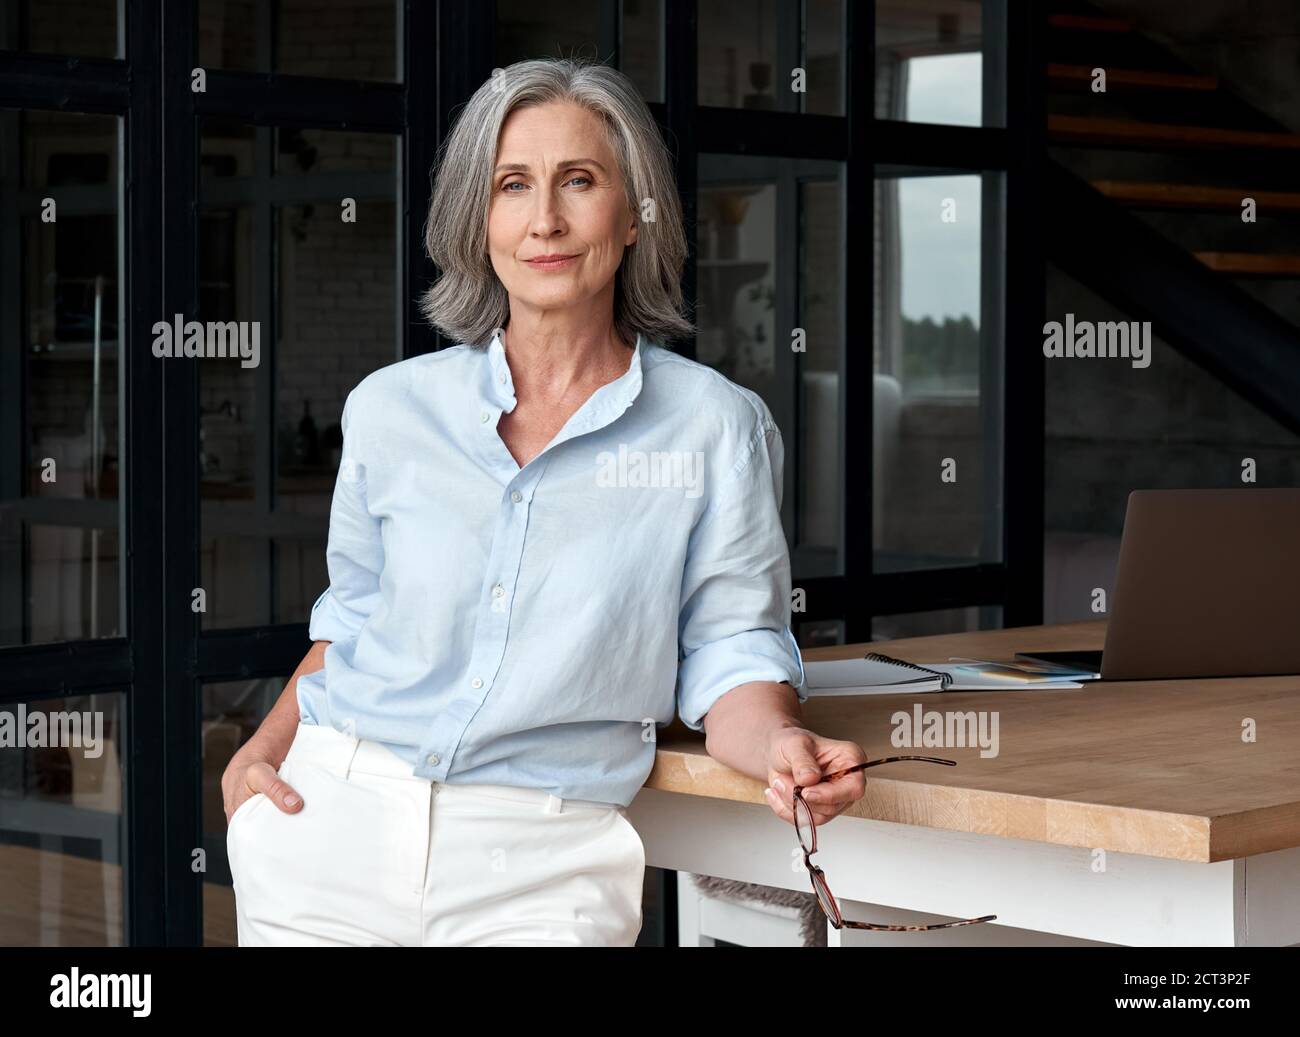 Confident stylish middle aged woman standing at office workplace, portrait. Stock Photo